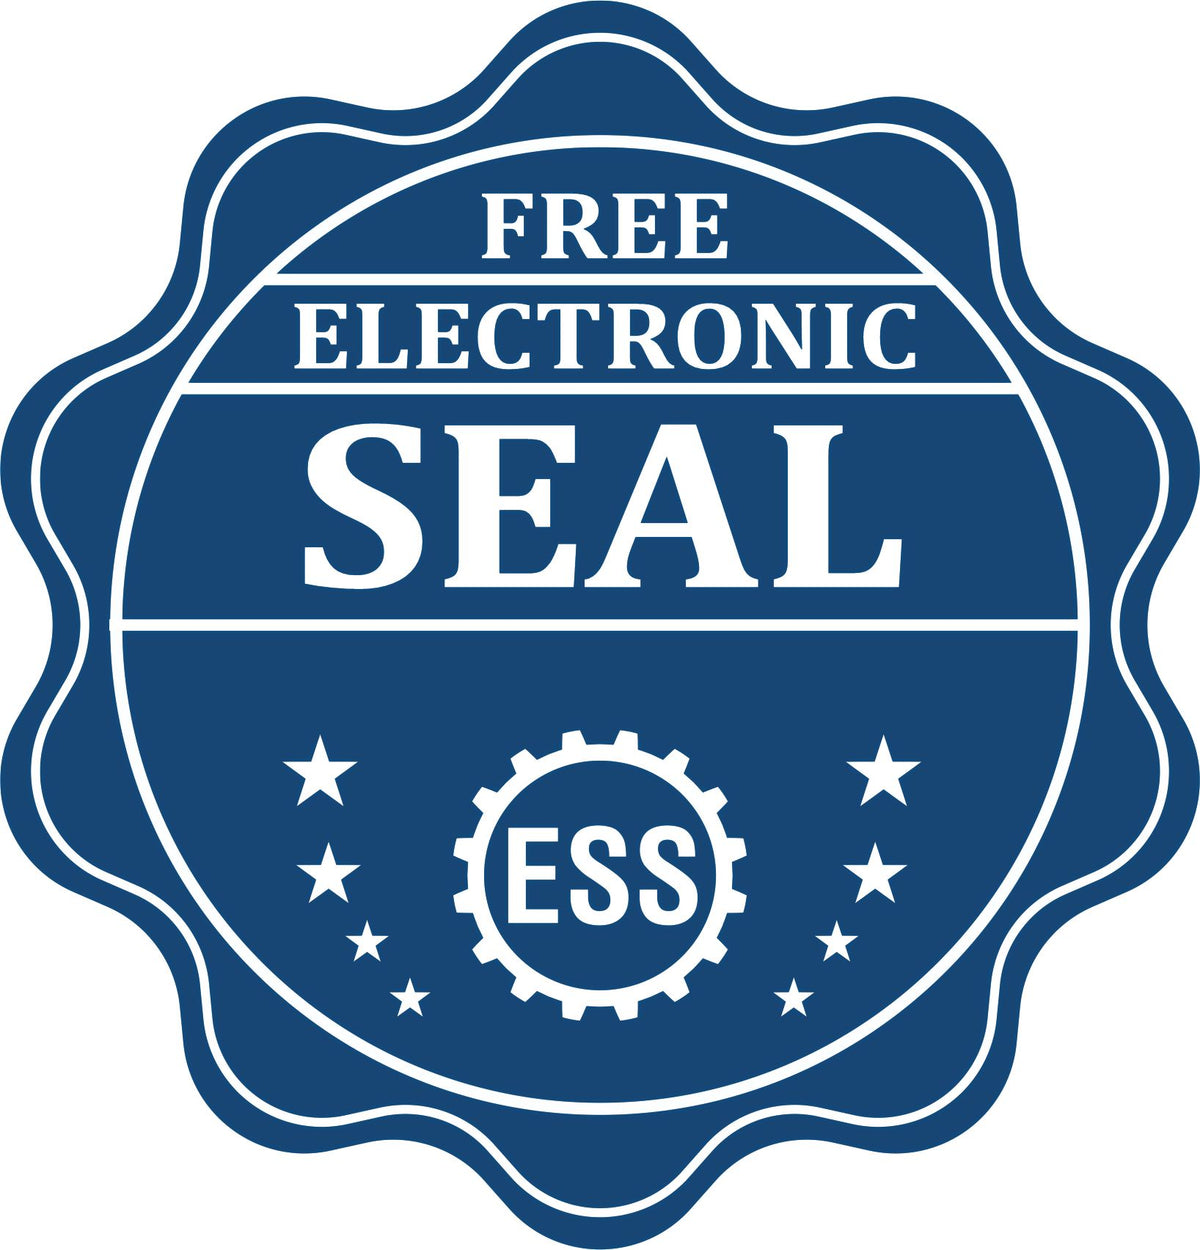 A badge showing a free electronic seal for the Wooden Handle Arkansas Rectangular Notary Public Stamp with stars and the ESS gear on the emblem.